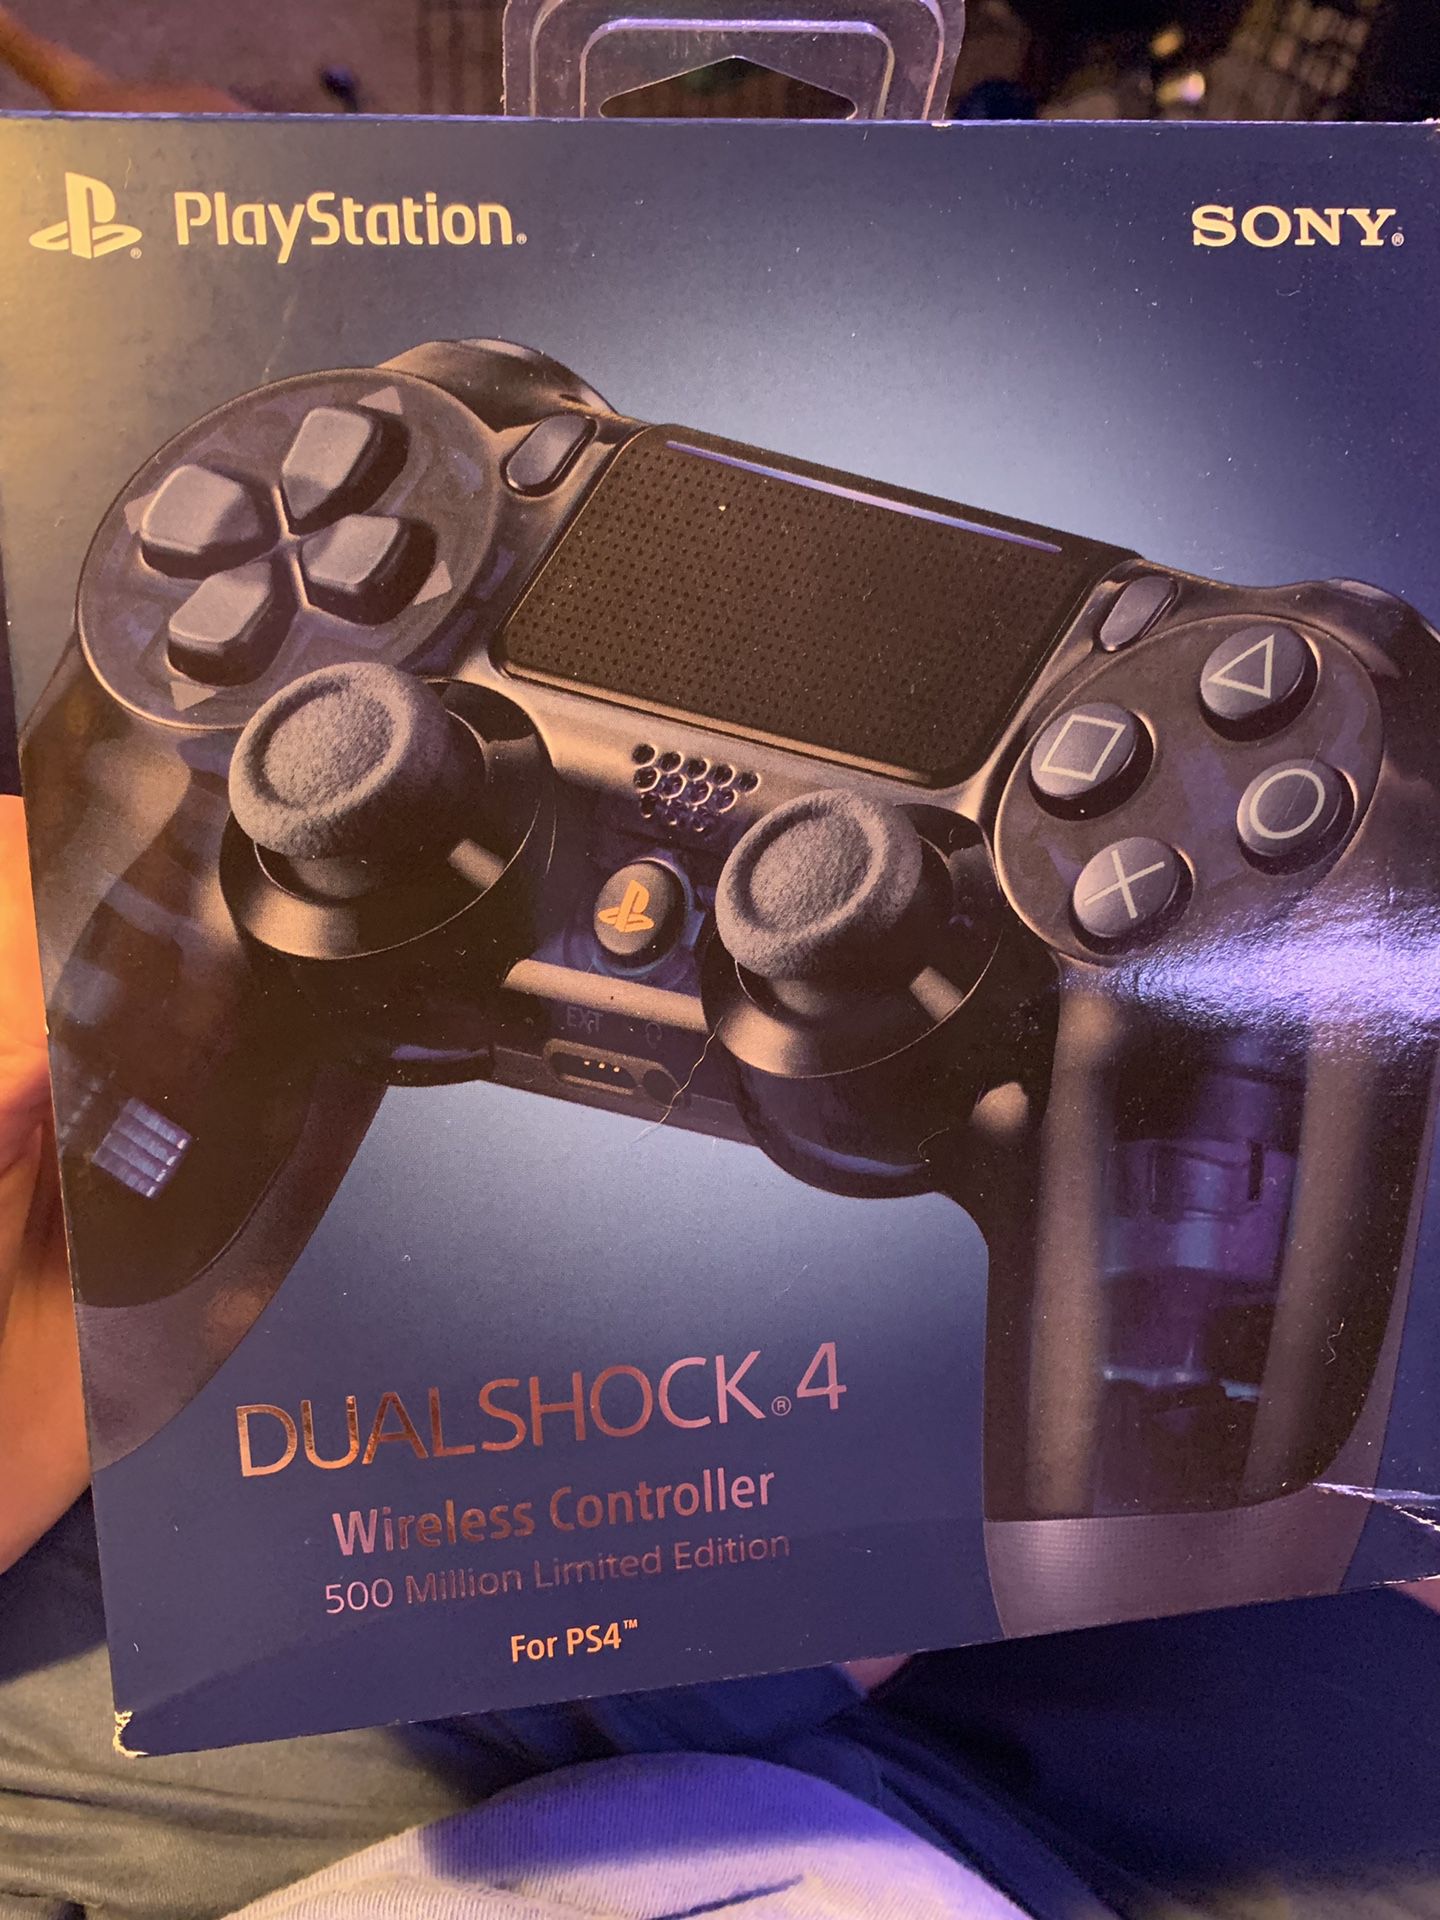 Play station controller